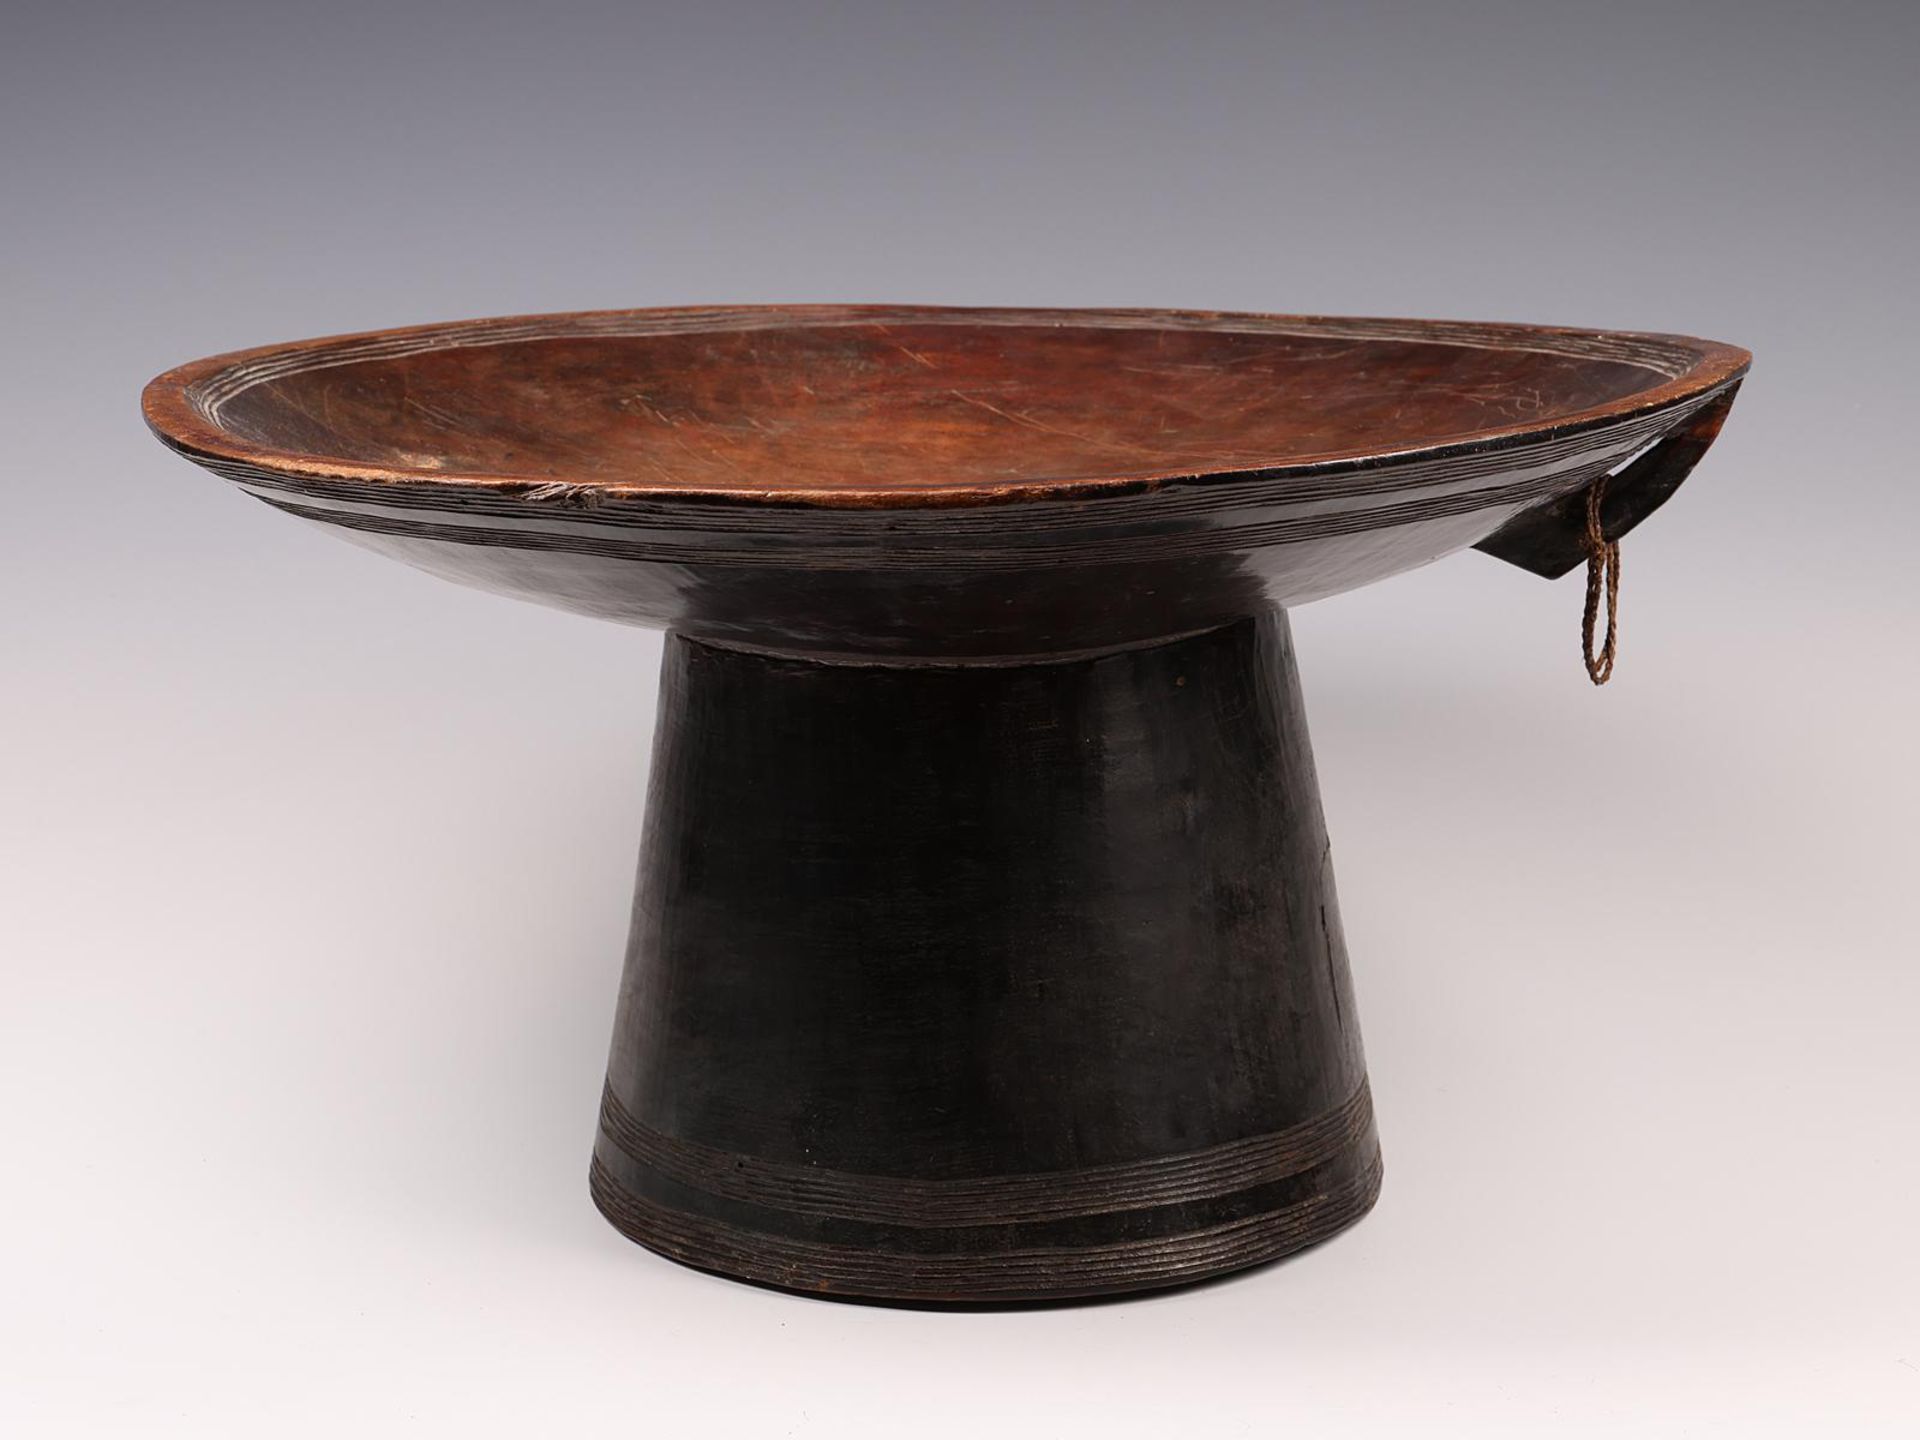 Ethiopia, a fine wooden food platter on a conical stand